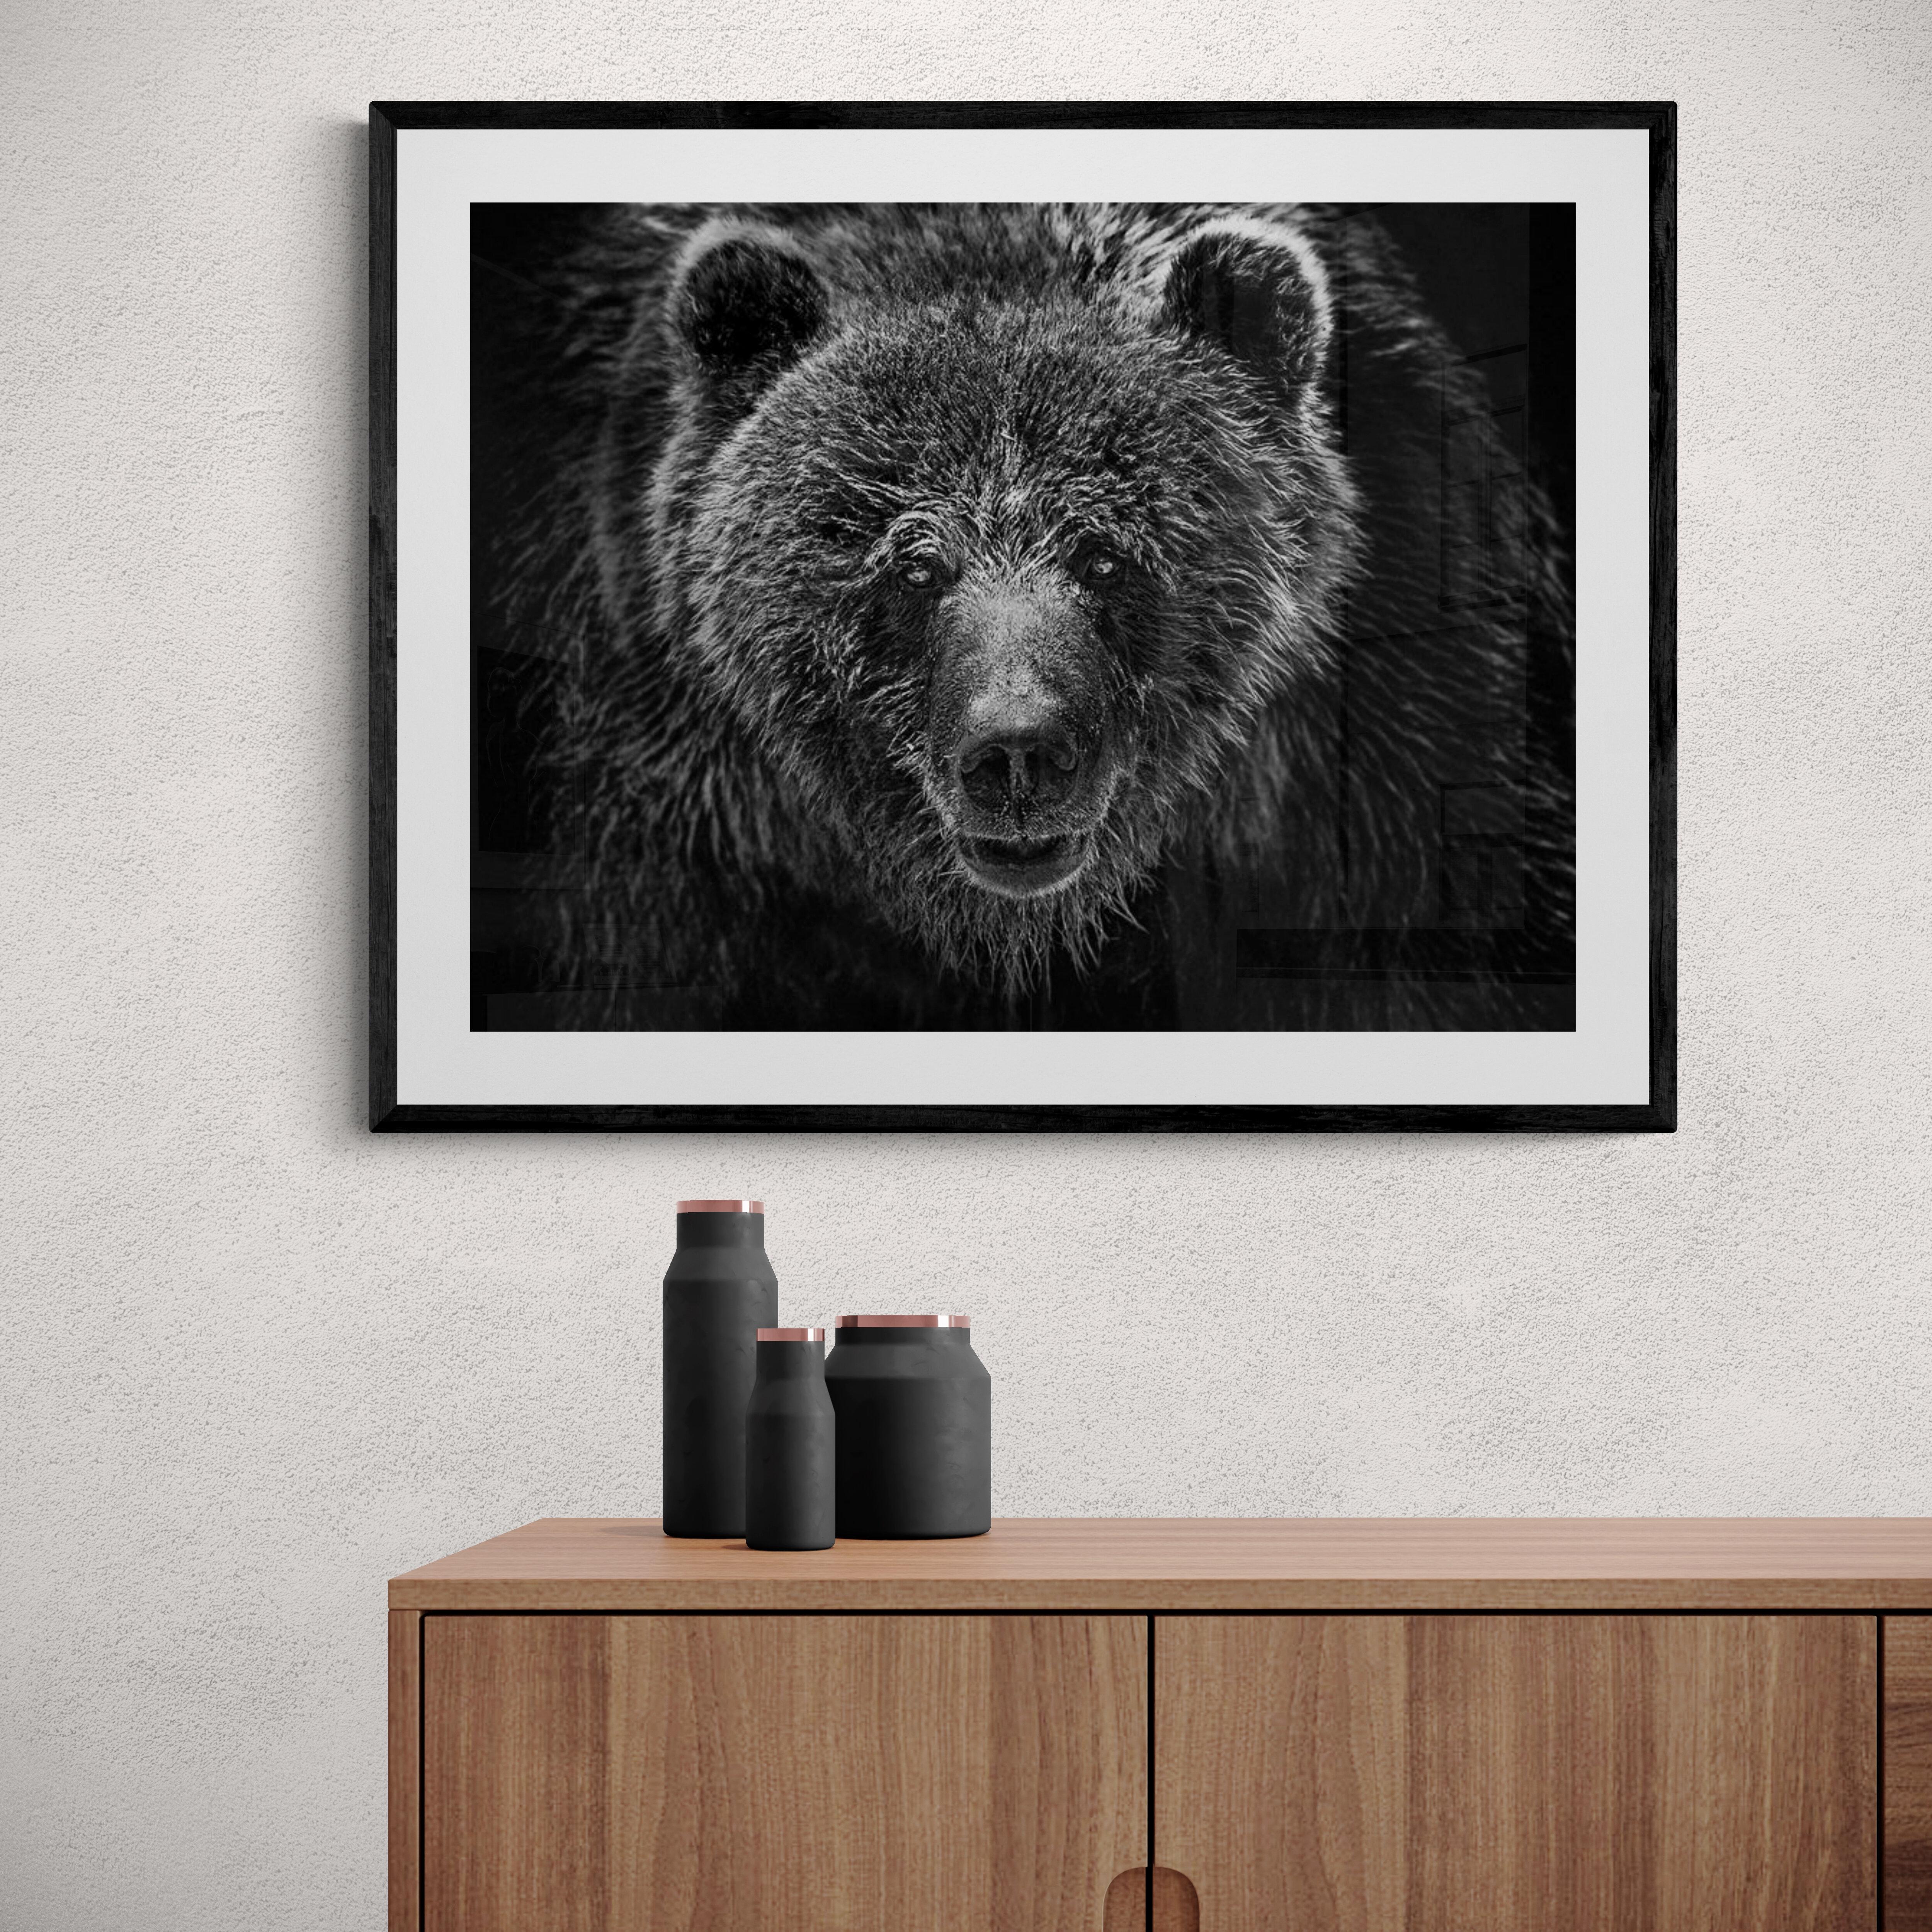 Grizzly Bear Portrait
An rare look into the eyse of an apex predator
36x48  Edition of 12. Signed by Shane.  
Printed on archival paper and using archival inks
 Framing available. Inquire for rates.   

 Shane Russeck has built a reputation for